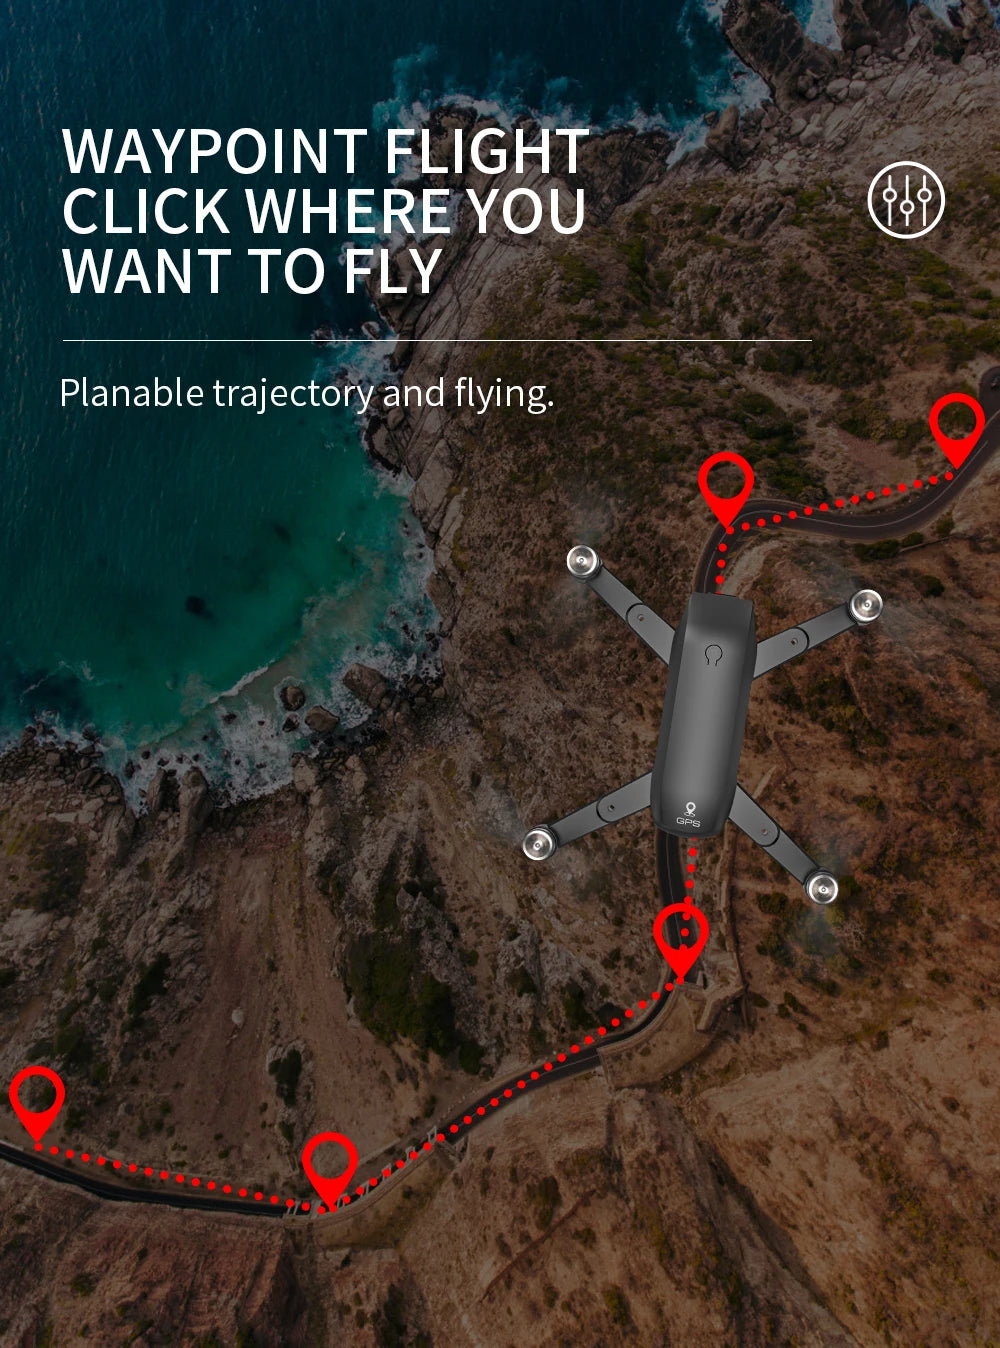 waypoint flight click where you want to fly planable trajectory and flying